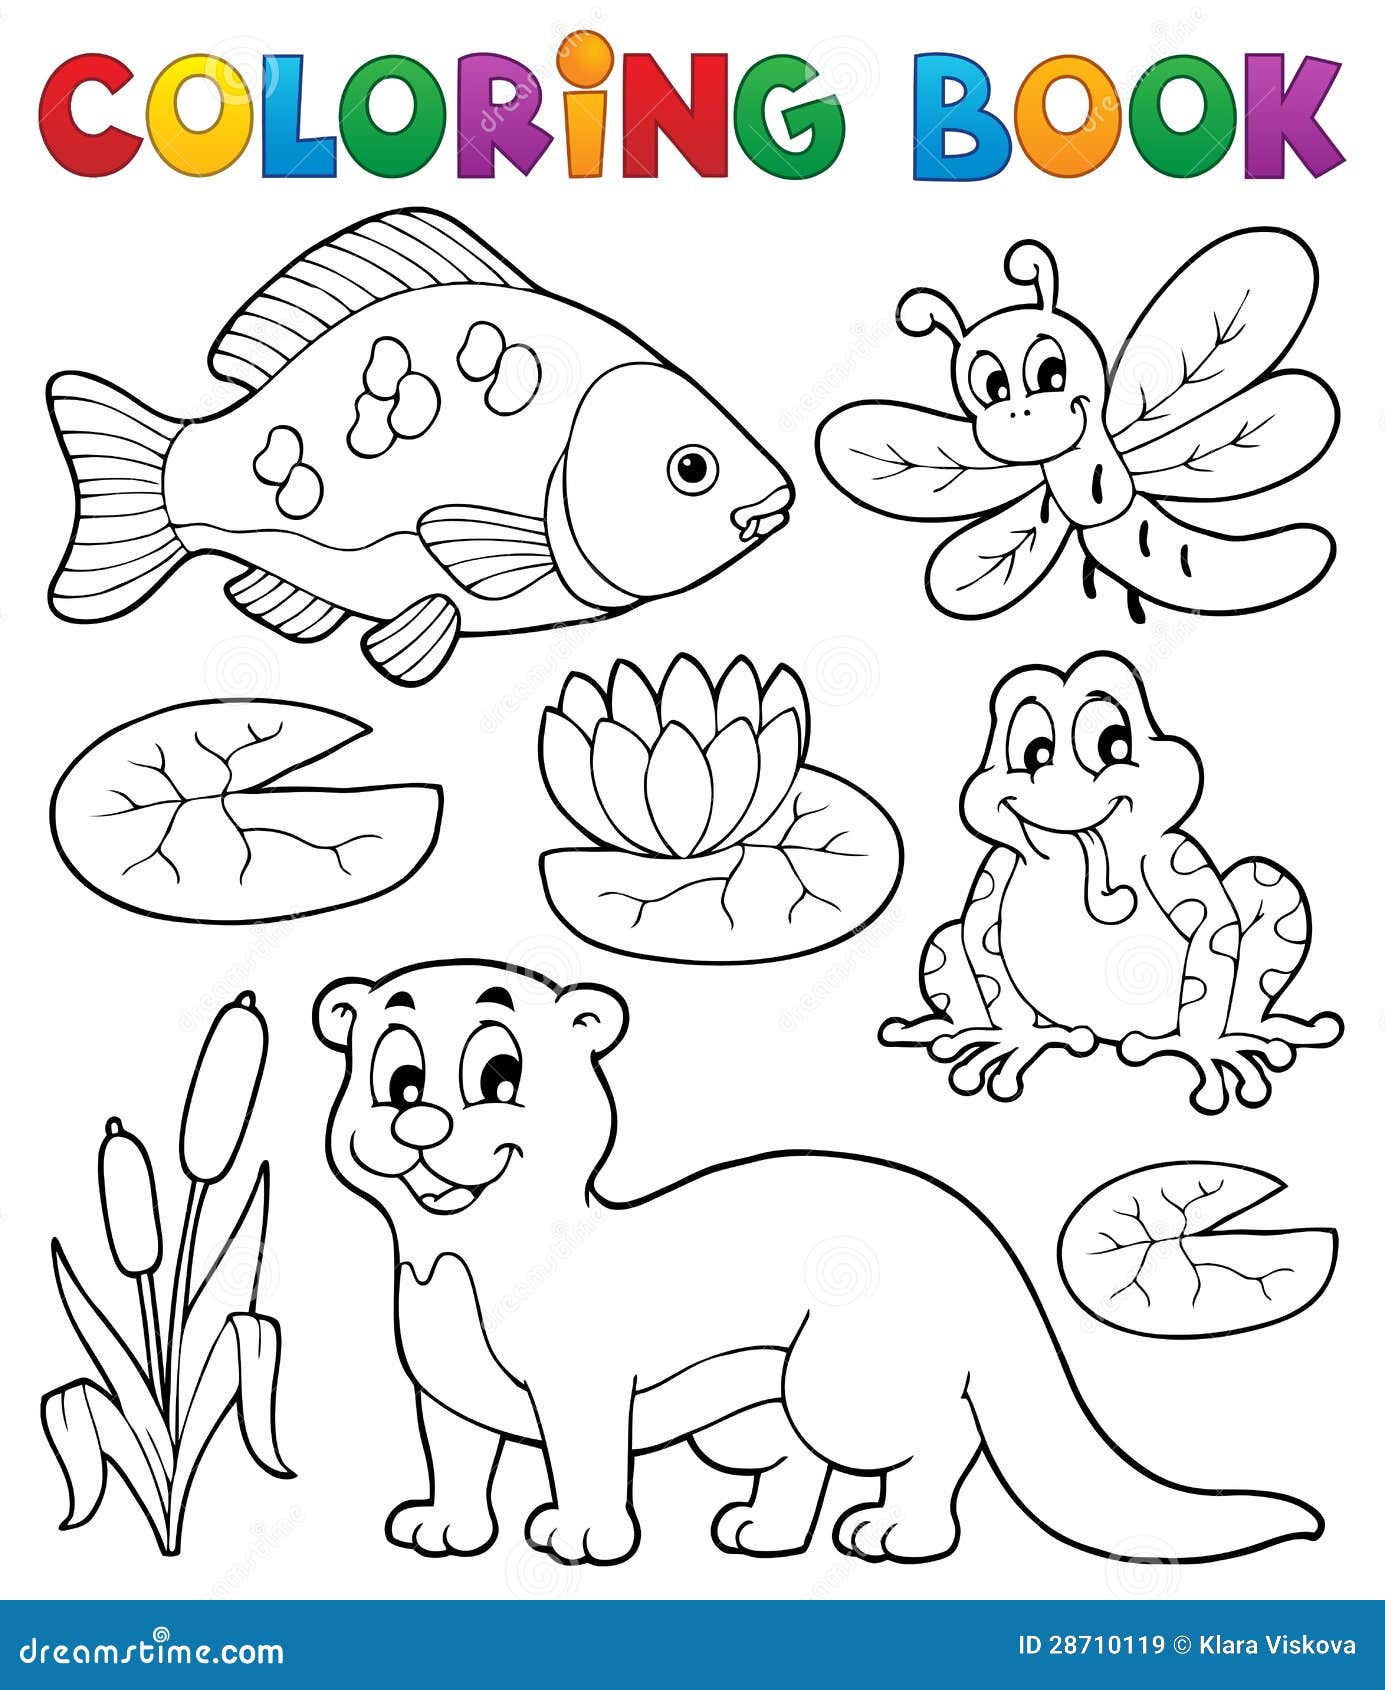 Coloring Book River Fauna Image 20 Stock Vector   Illustration of ...